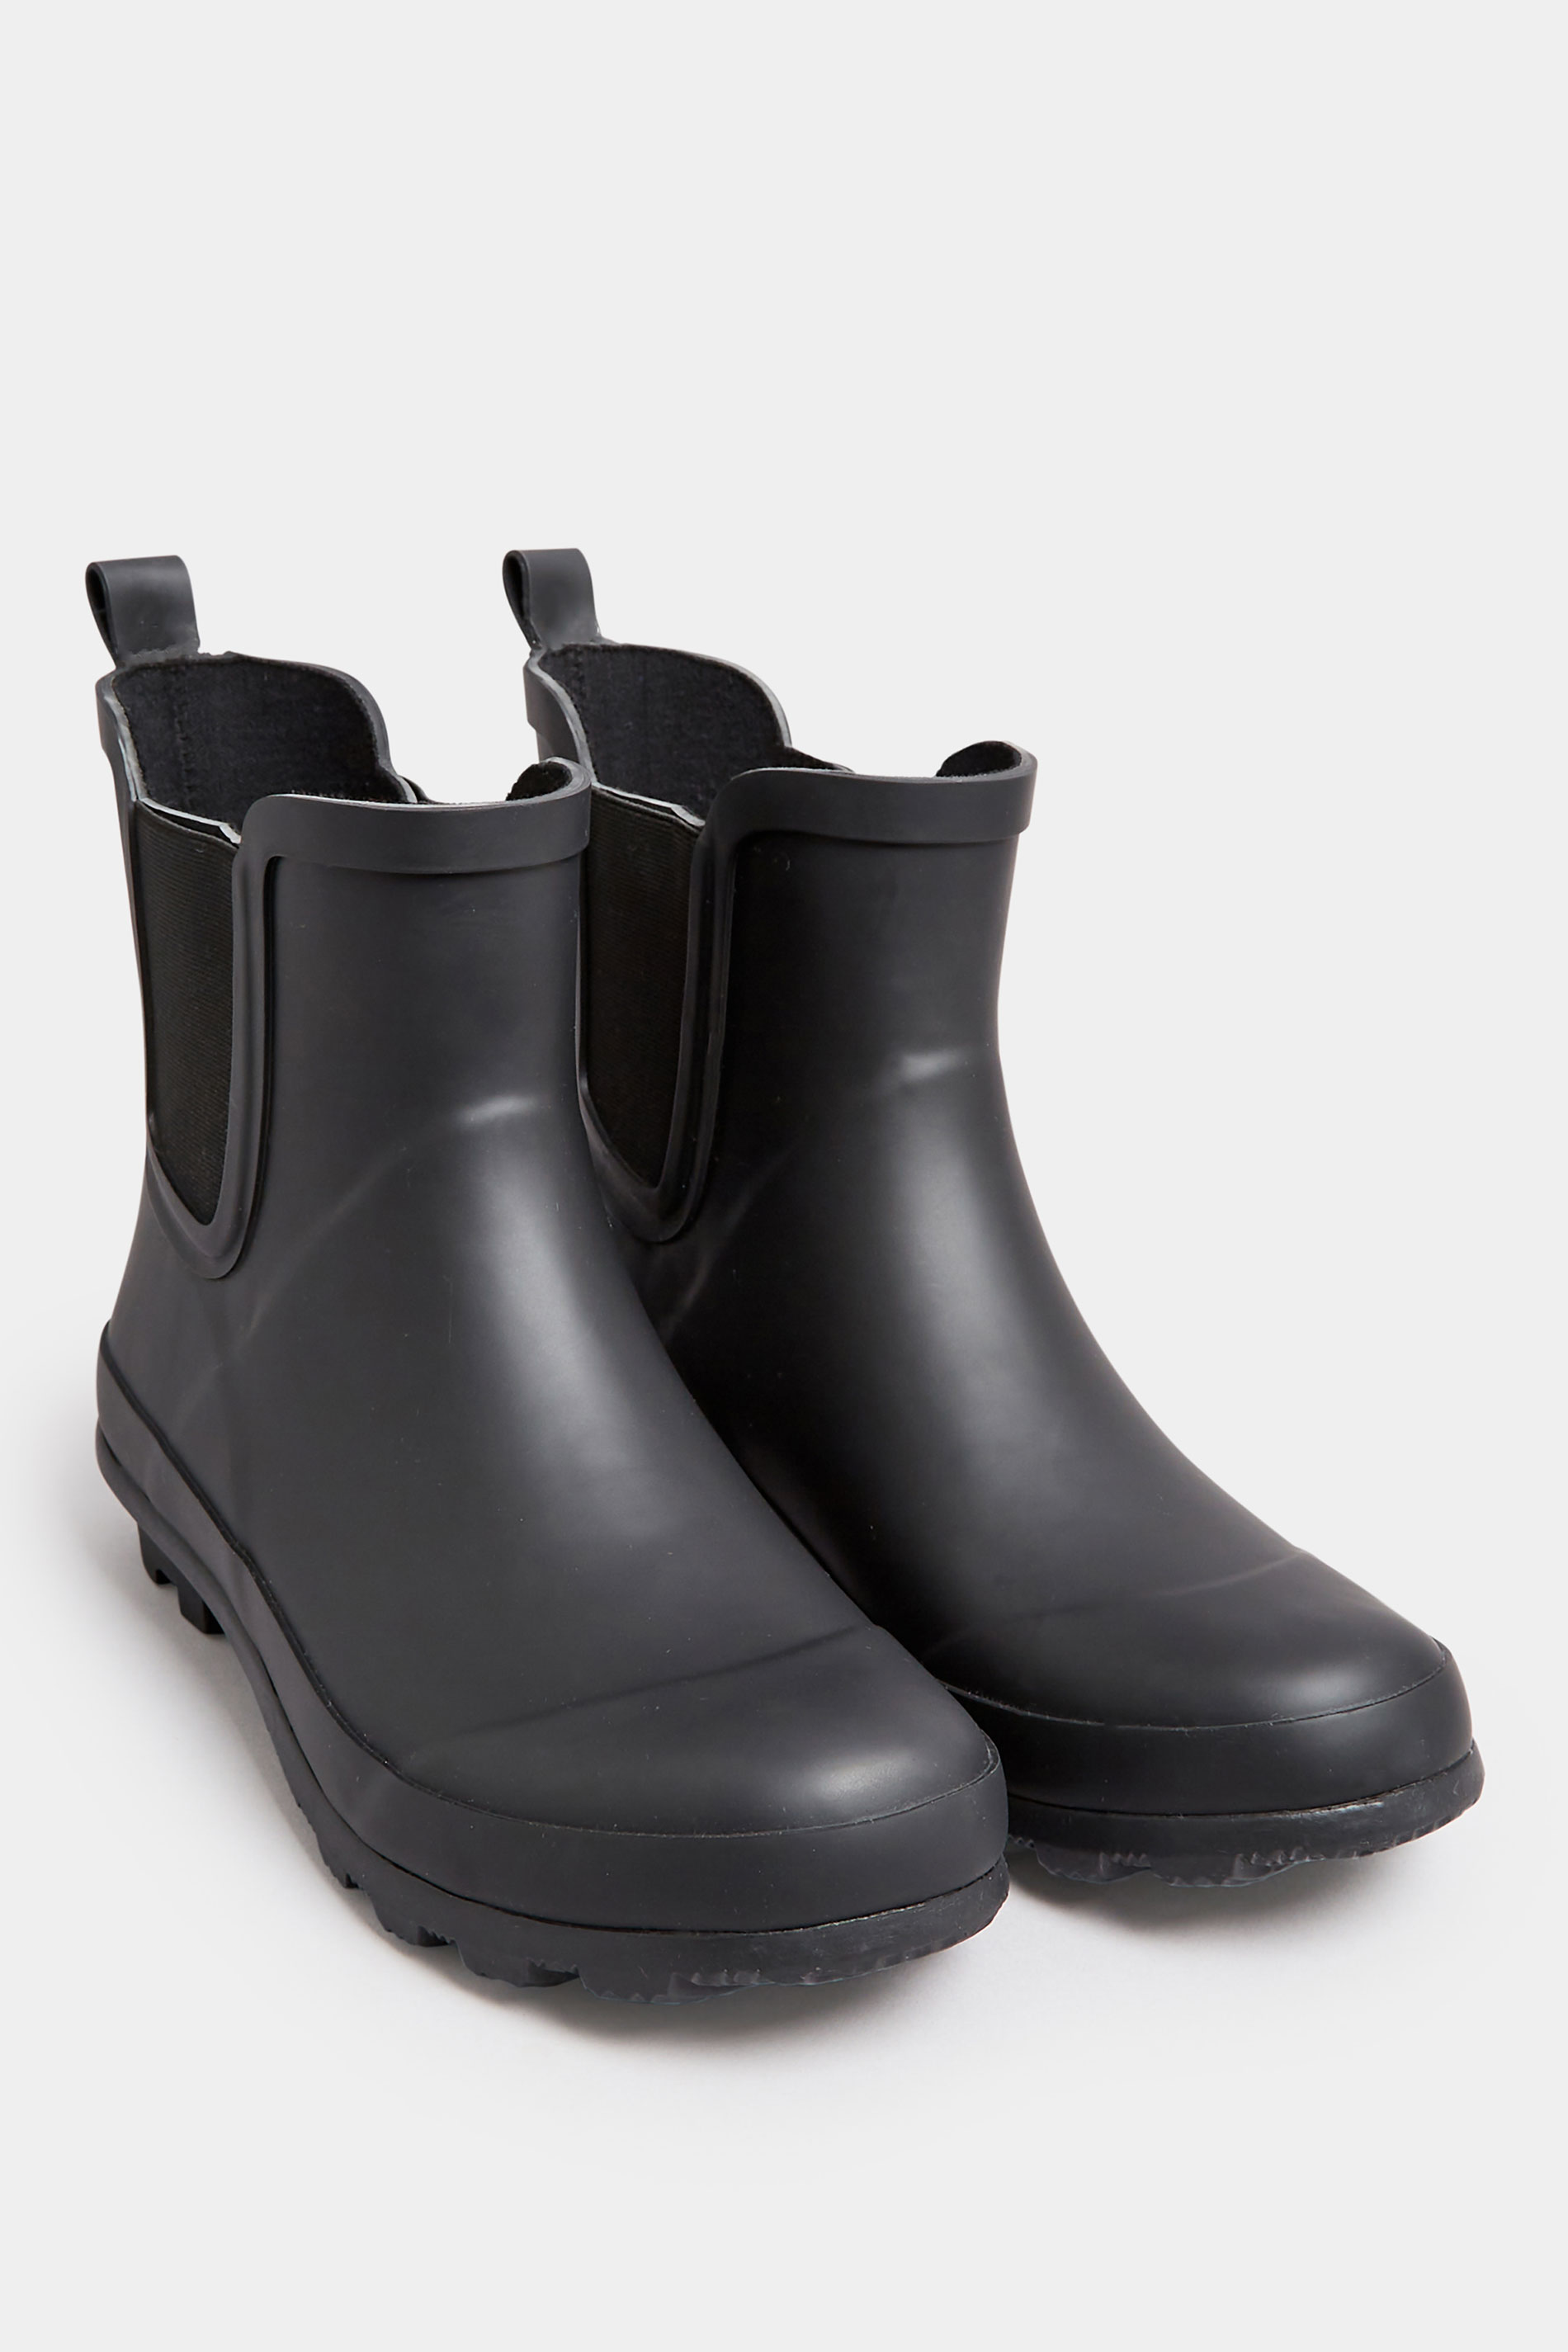 Black Chelsea Wellies In Wide E Fit | Yours Clothing 2